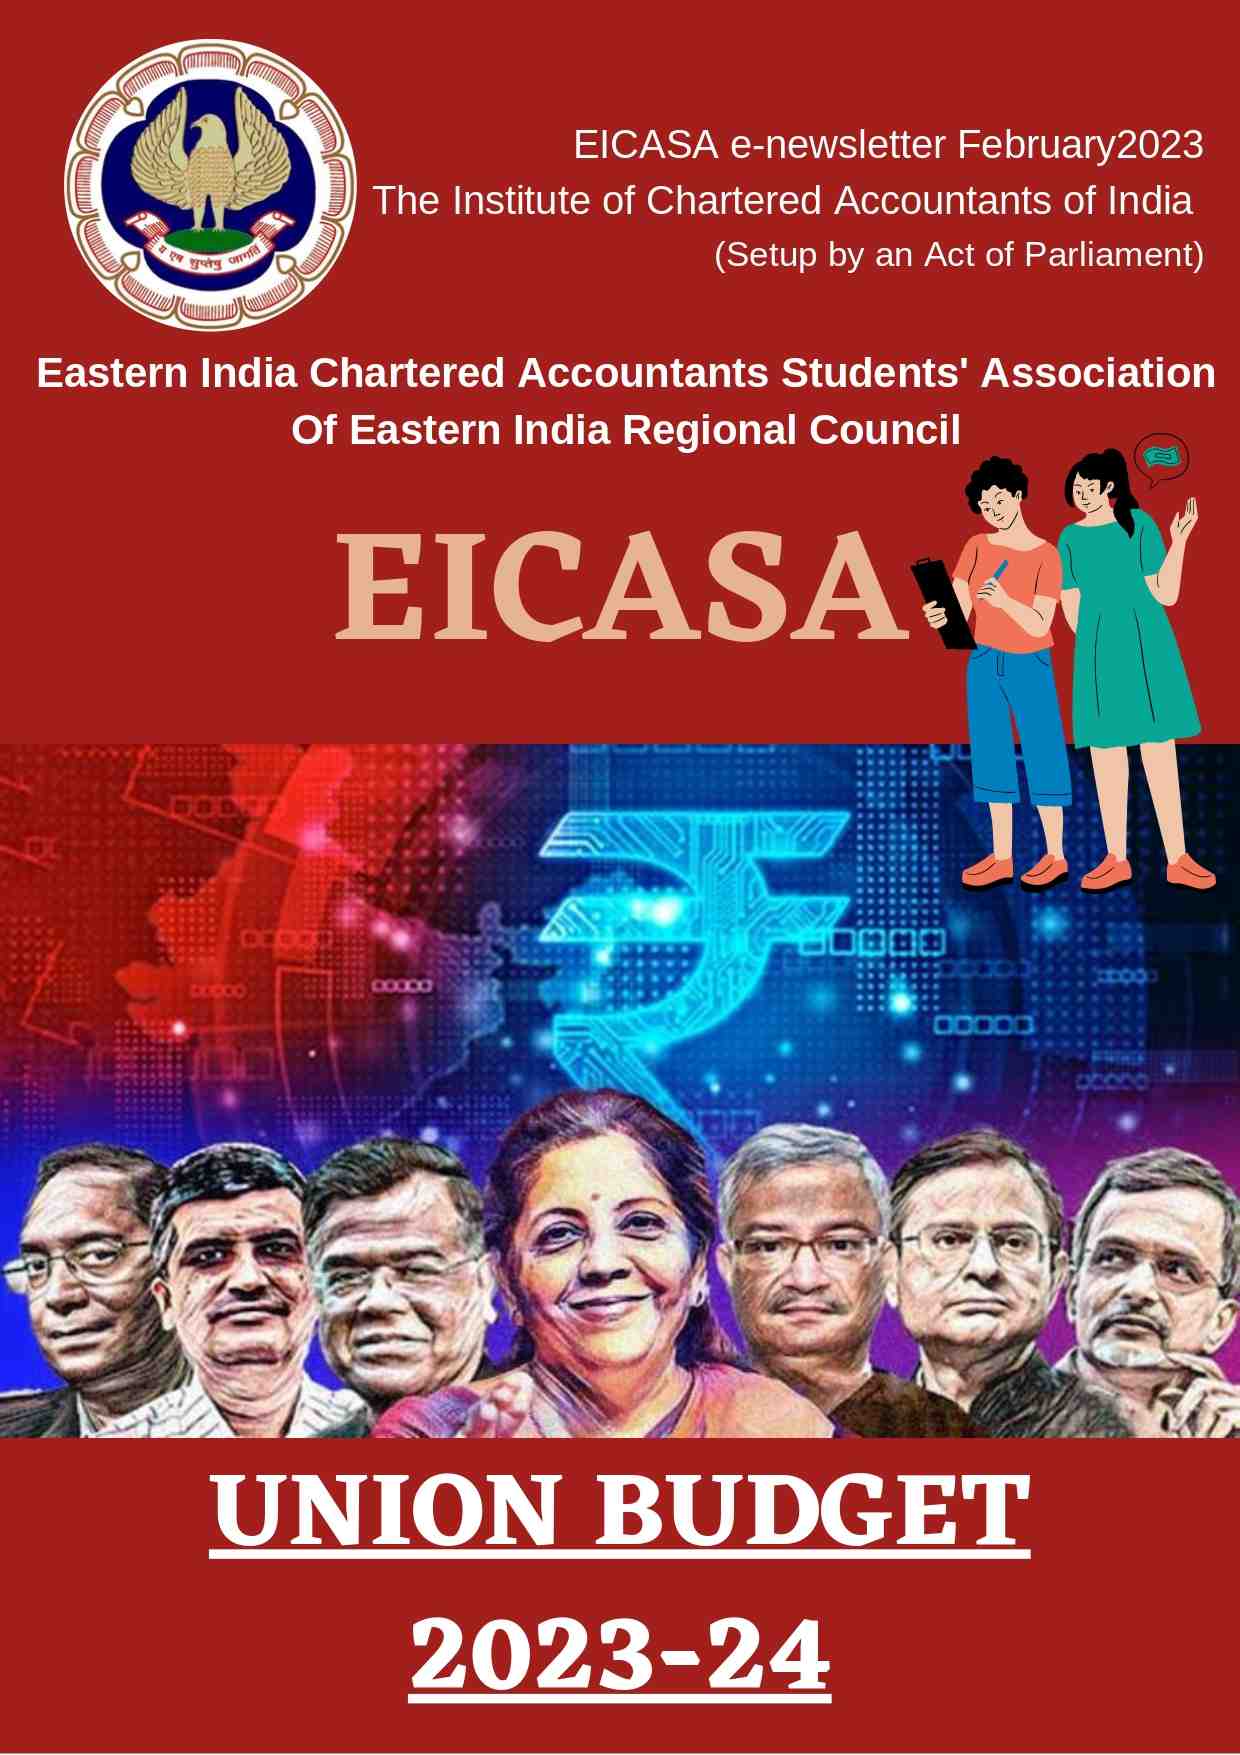 https://eirc-icai.org/public/uploads/newsletter/ENewsletter FebruaryCoverpage_page-0001_1681881906.jpg